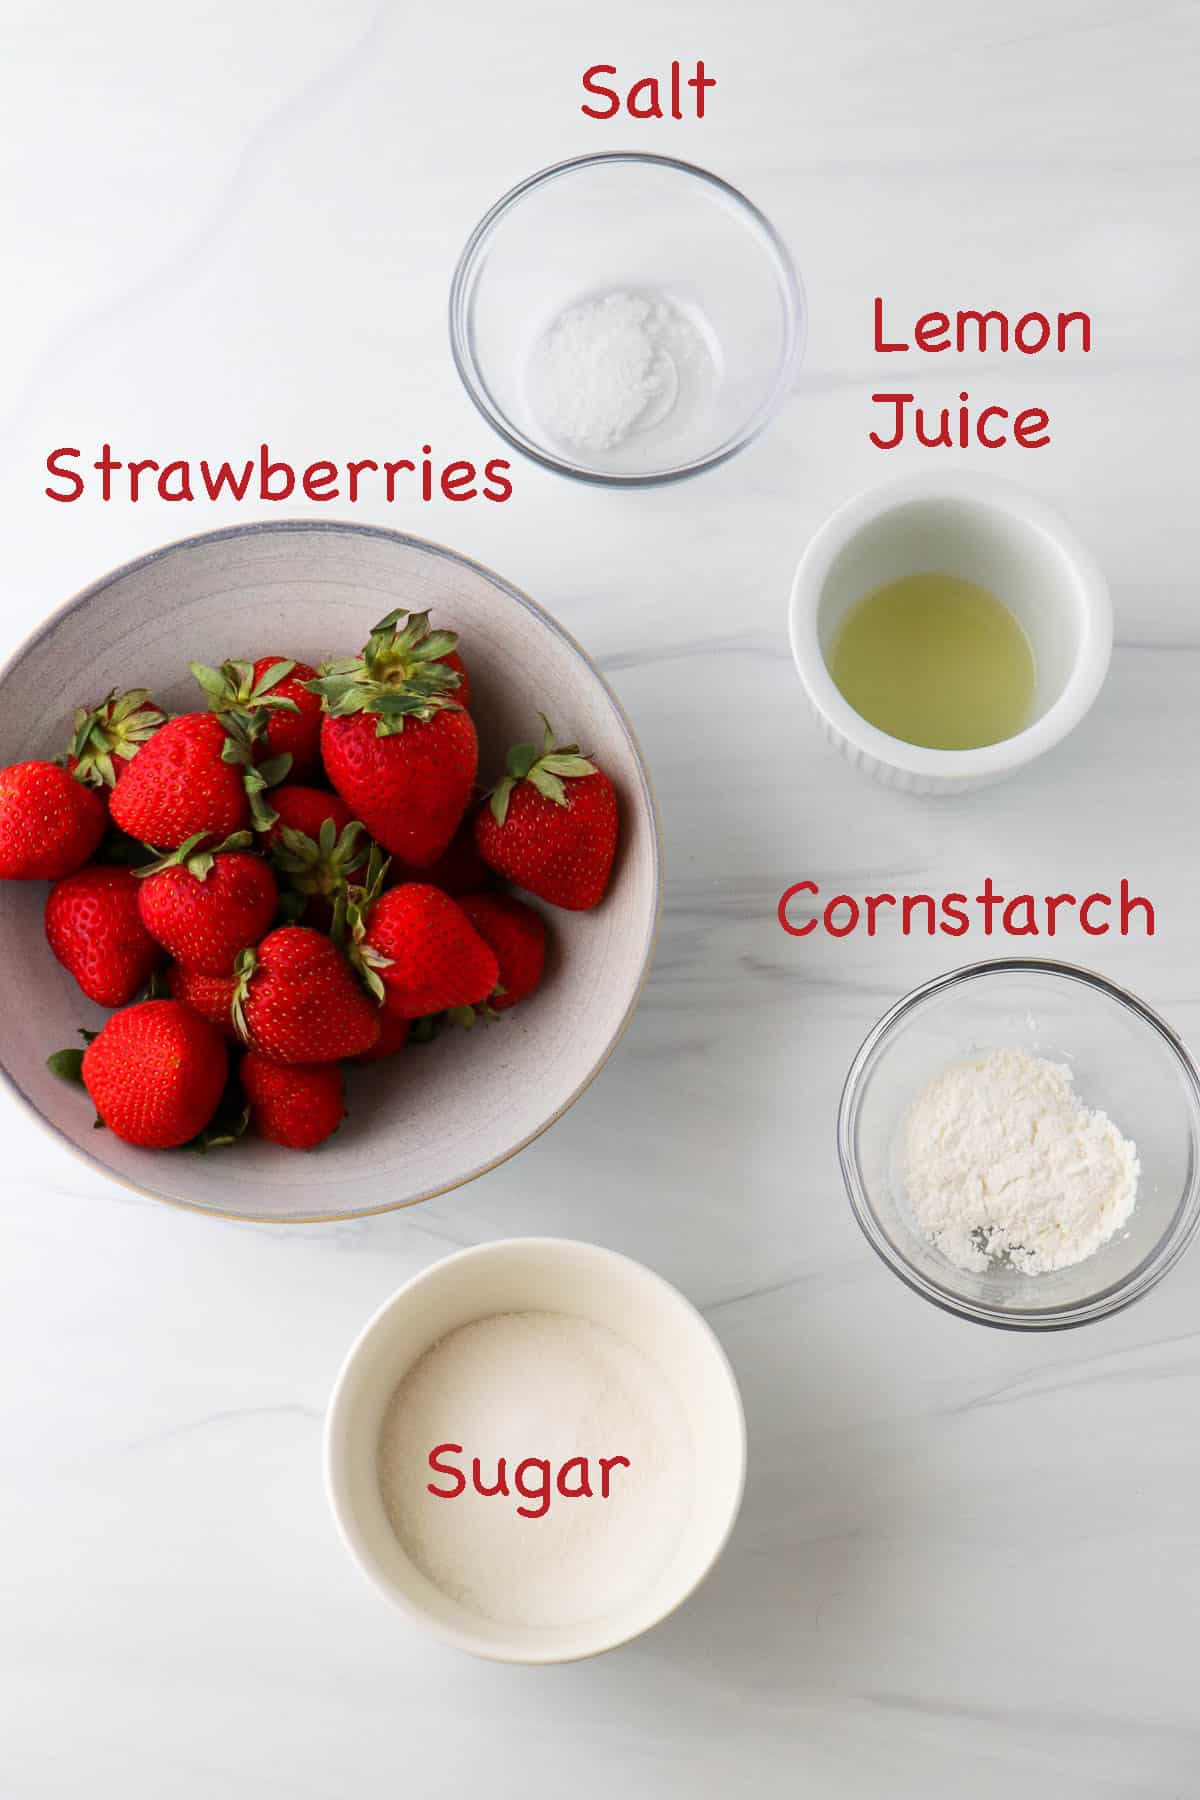 Labeled ingredients for homemade strawberry filling for Strawberry Roll Cake.